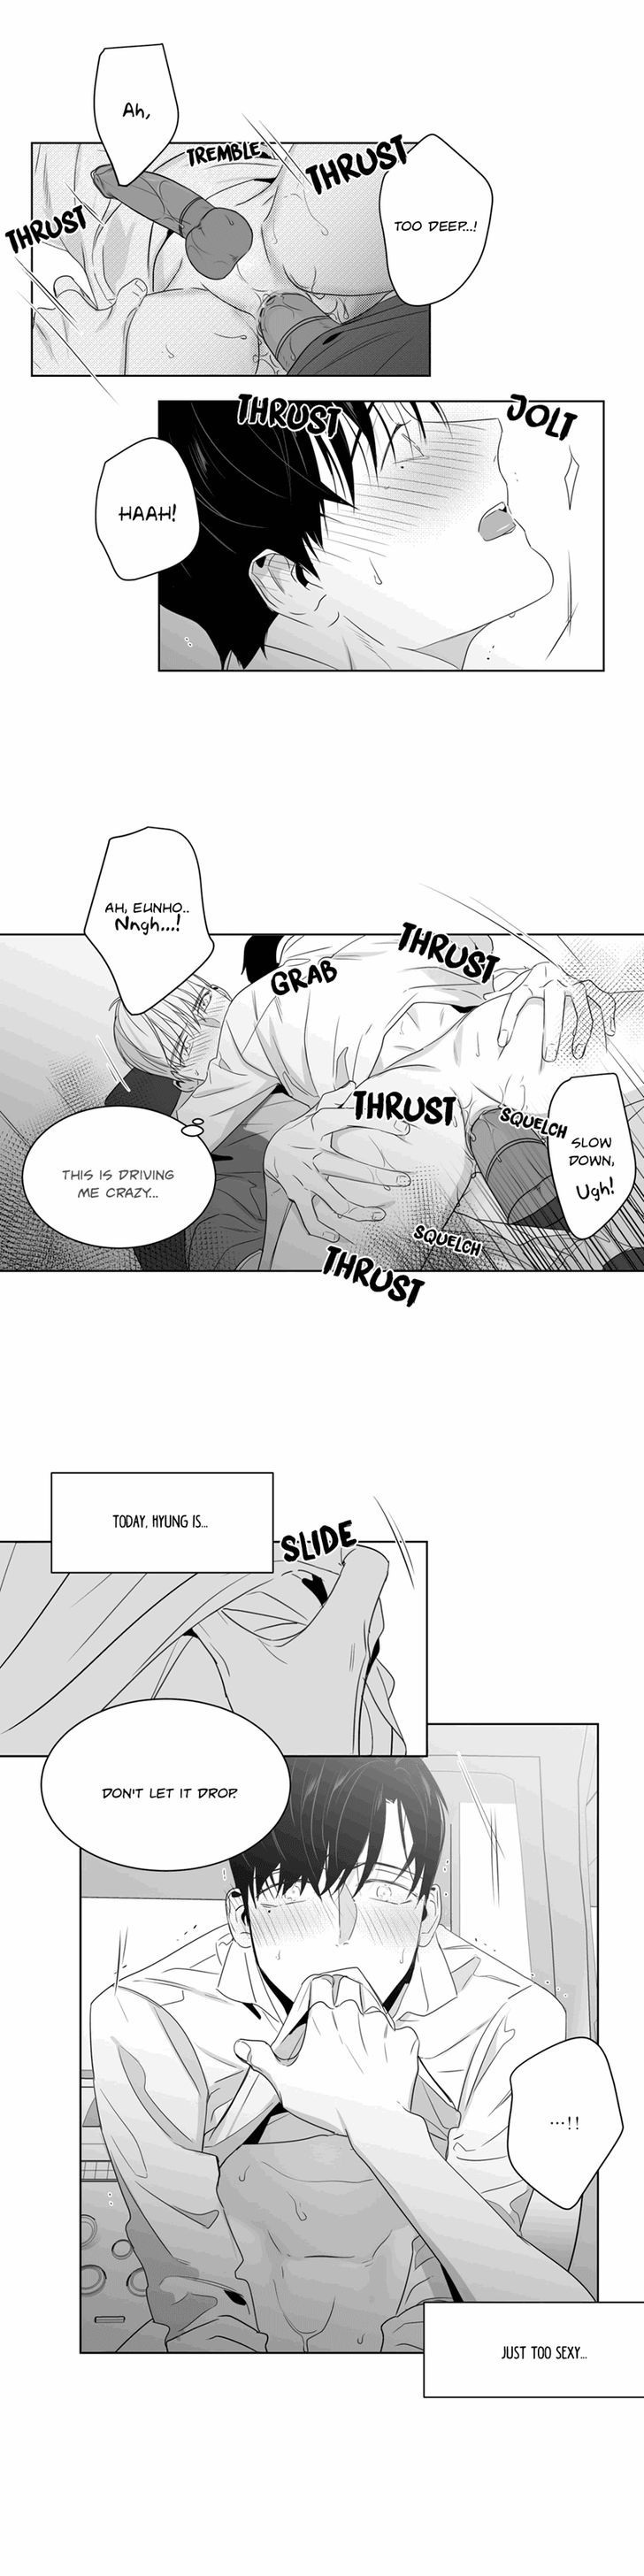 Lover Boy (Lezhin) Chapter 039 page 10